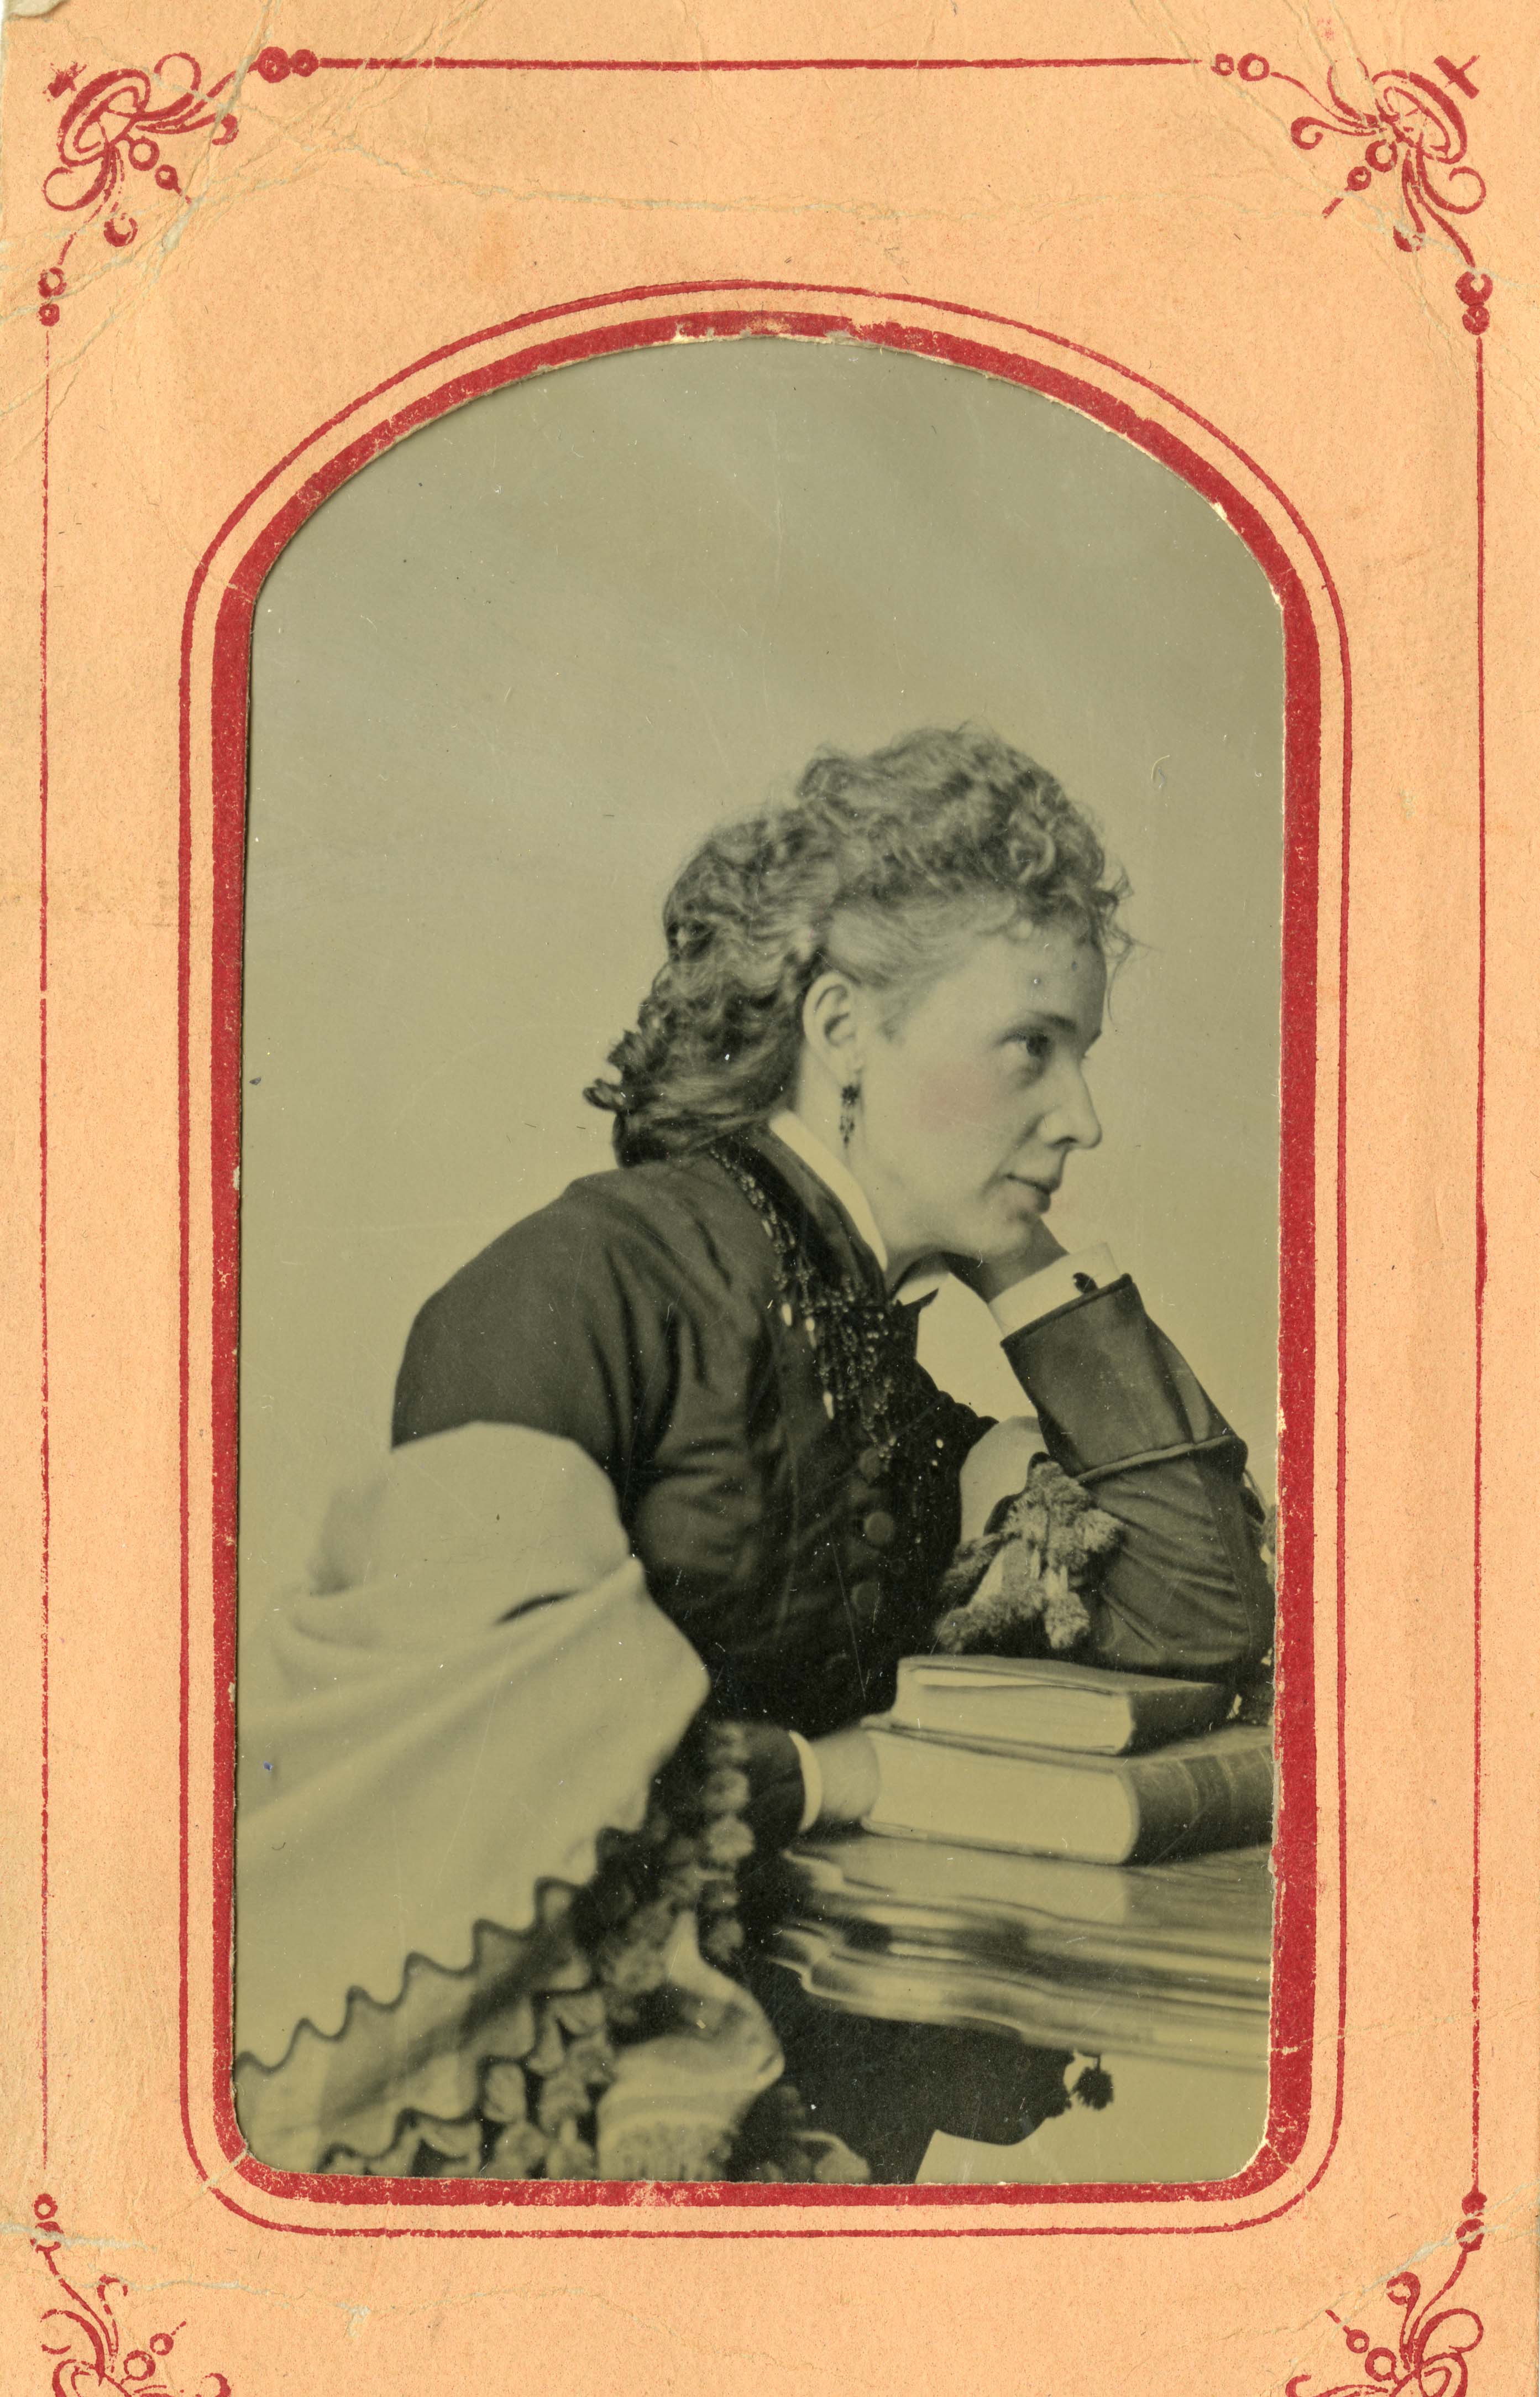 Tintype with orange paper mat from the 1860s (Human Development and Family Studies Photograph Collection)